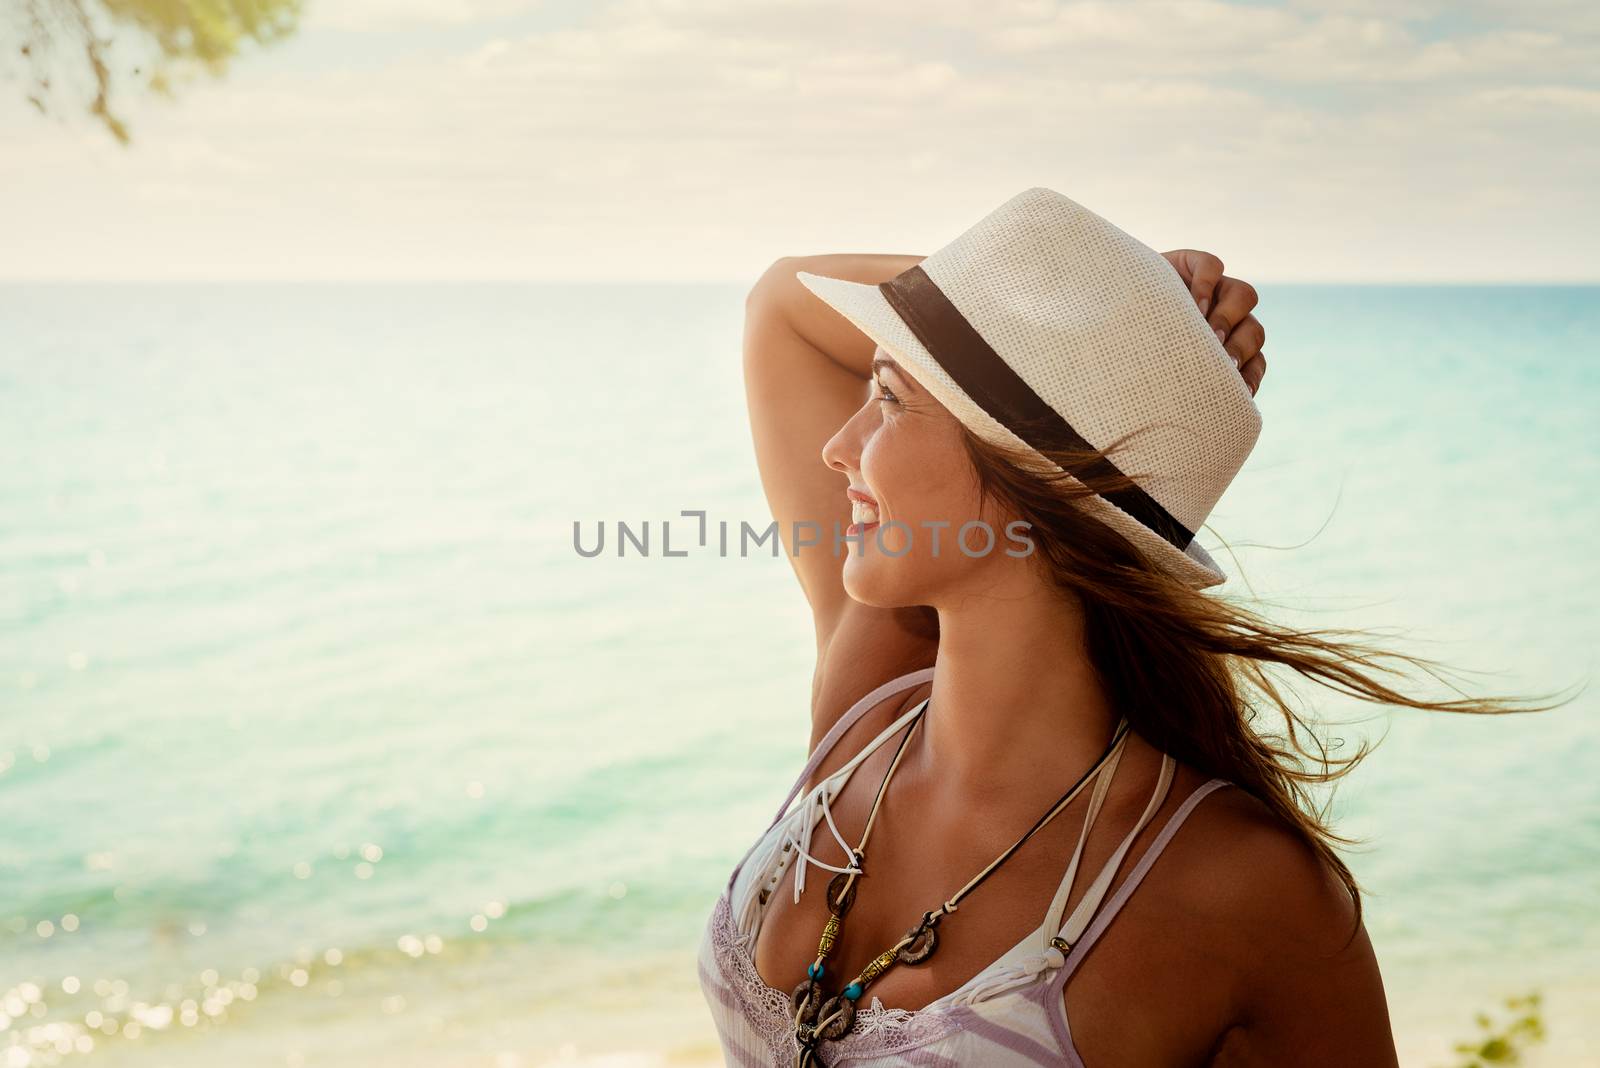 Beautiful young woman with summer hat enjoying on the beach. She is smiling and pensive looking away. 